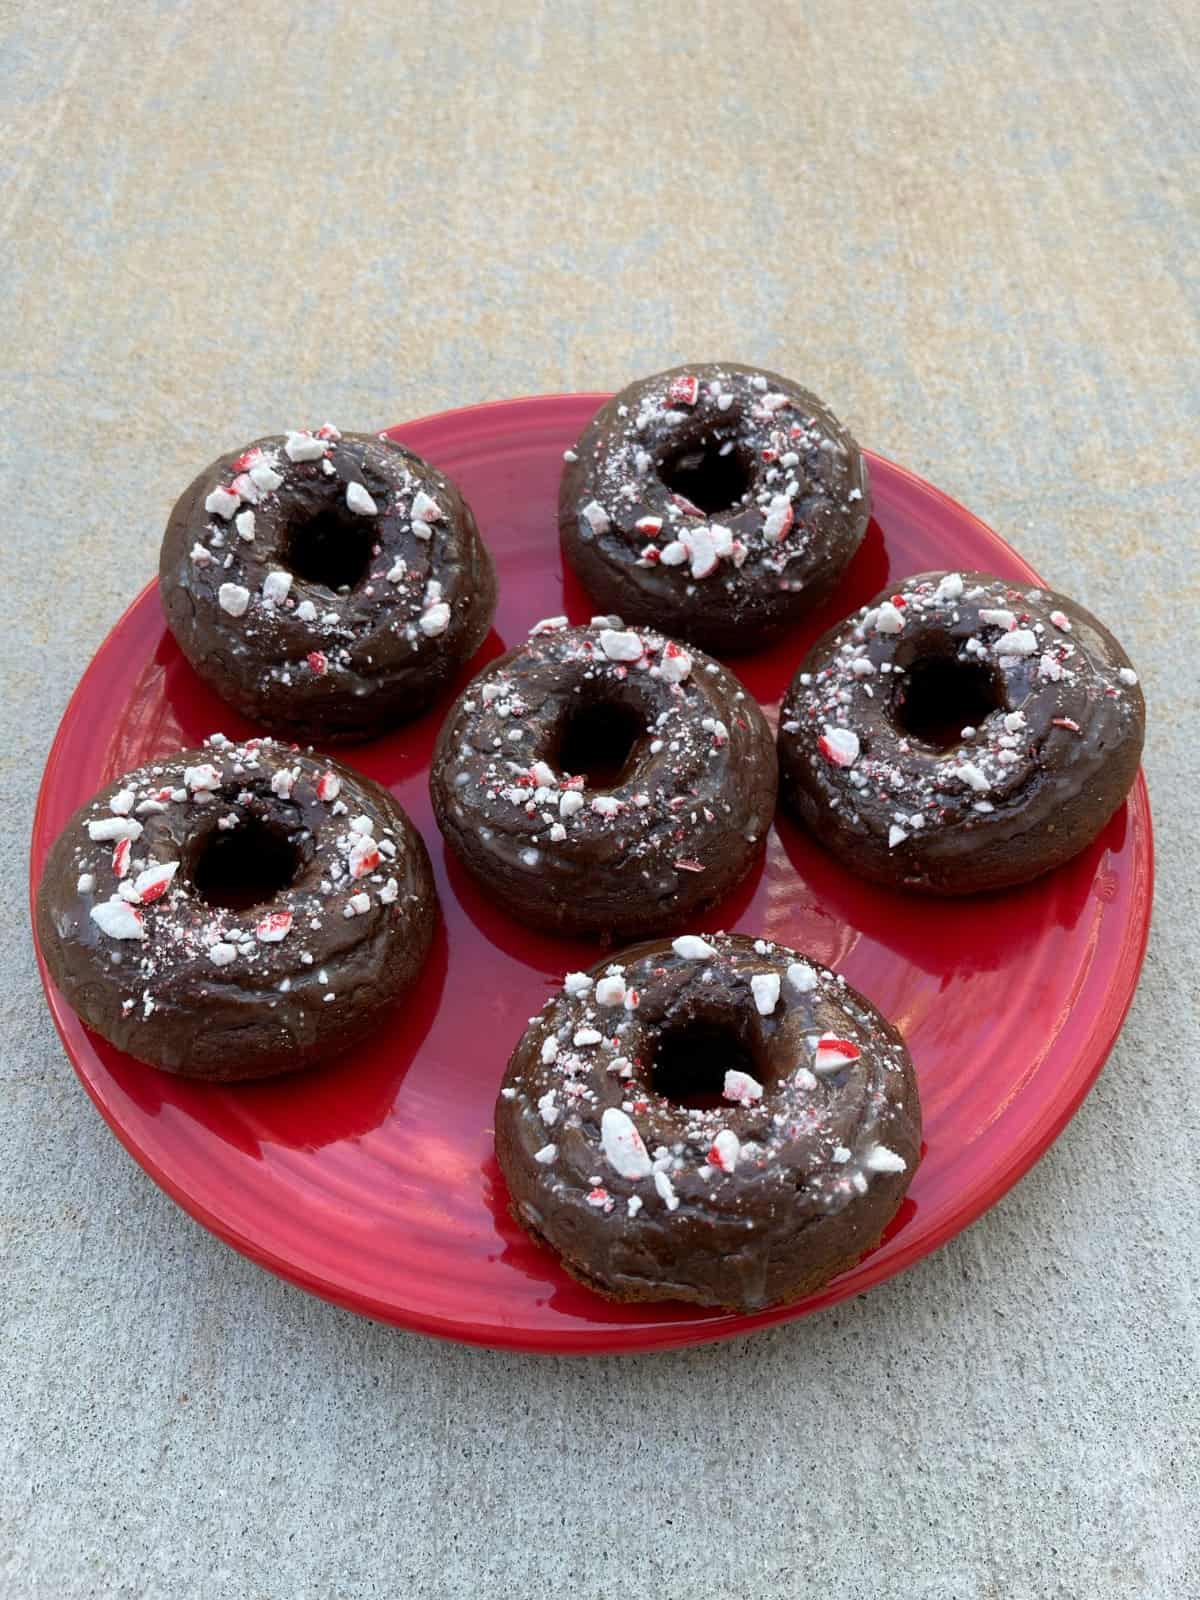 Crushed candy cane topped mint chocolate glazed donuts on red plate.